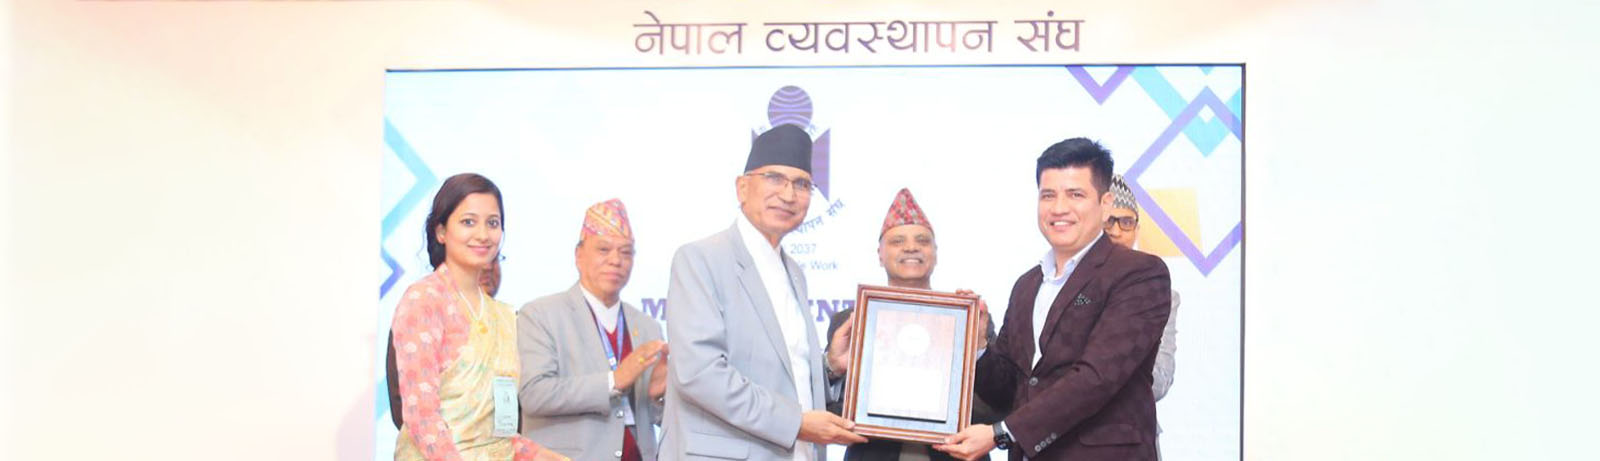 Ajesh Koirala, CEO of eSewa Money Transfer, awarded Manager of the Year 2022 - Banner Image